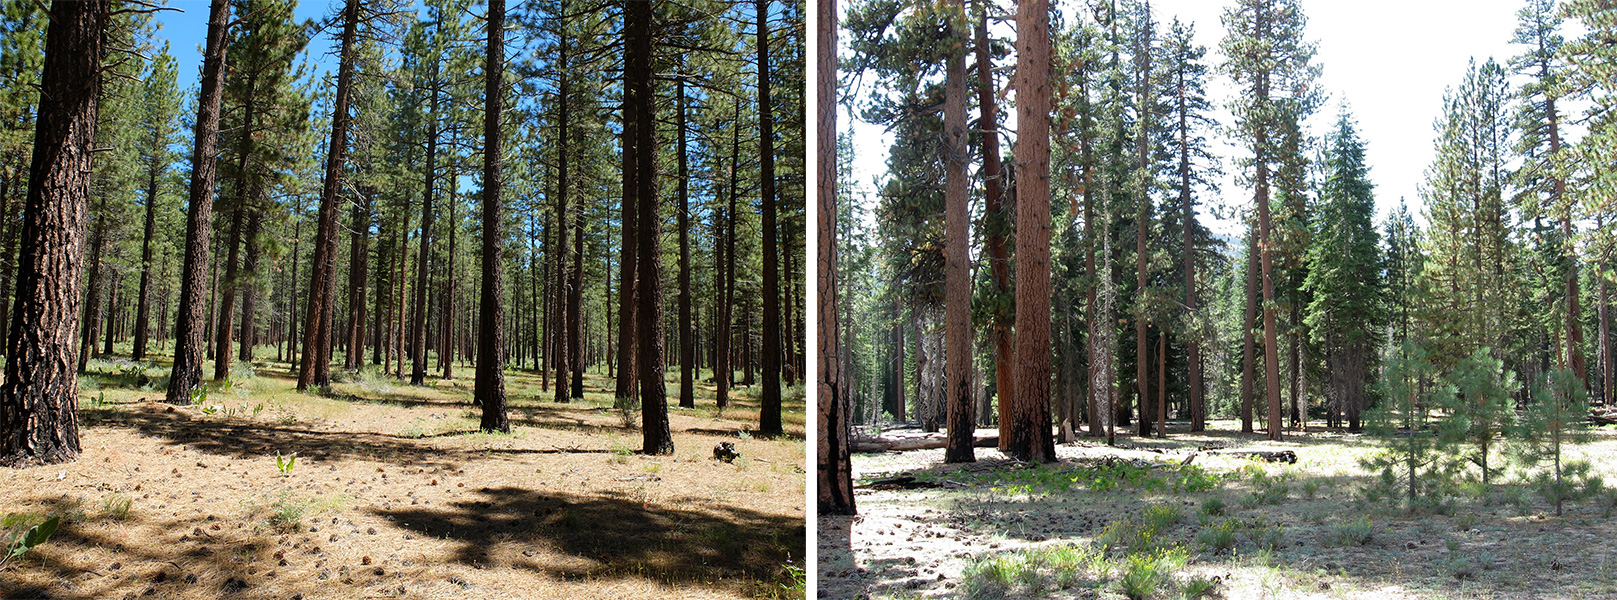 Photos of regenerating pine forests. On left, trees are in a rigid grid pattern; on right, they are more irregularly clumped, with open clearings between clumps